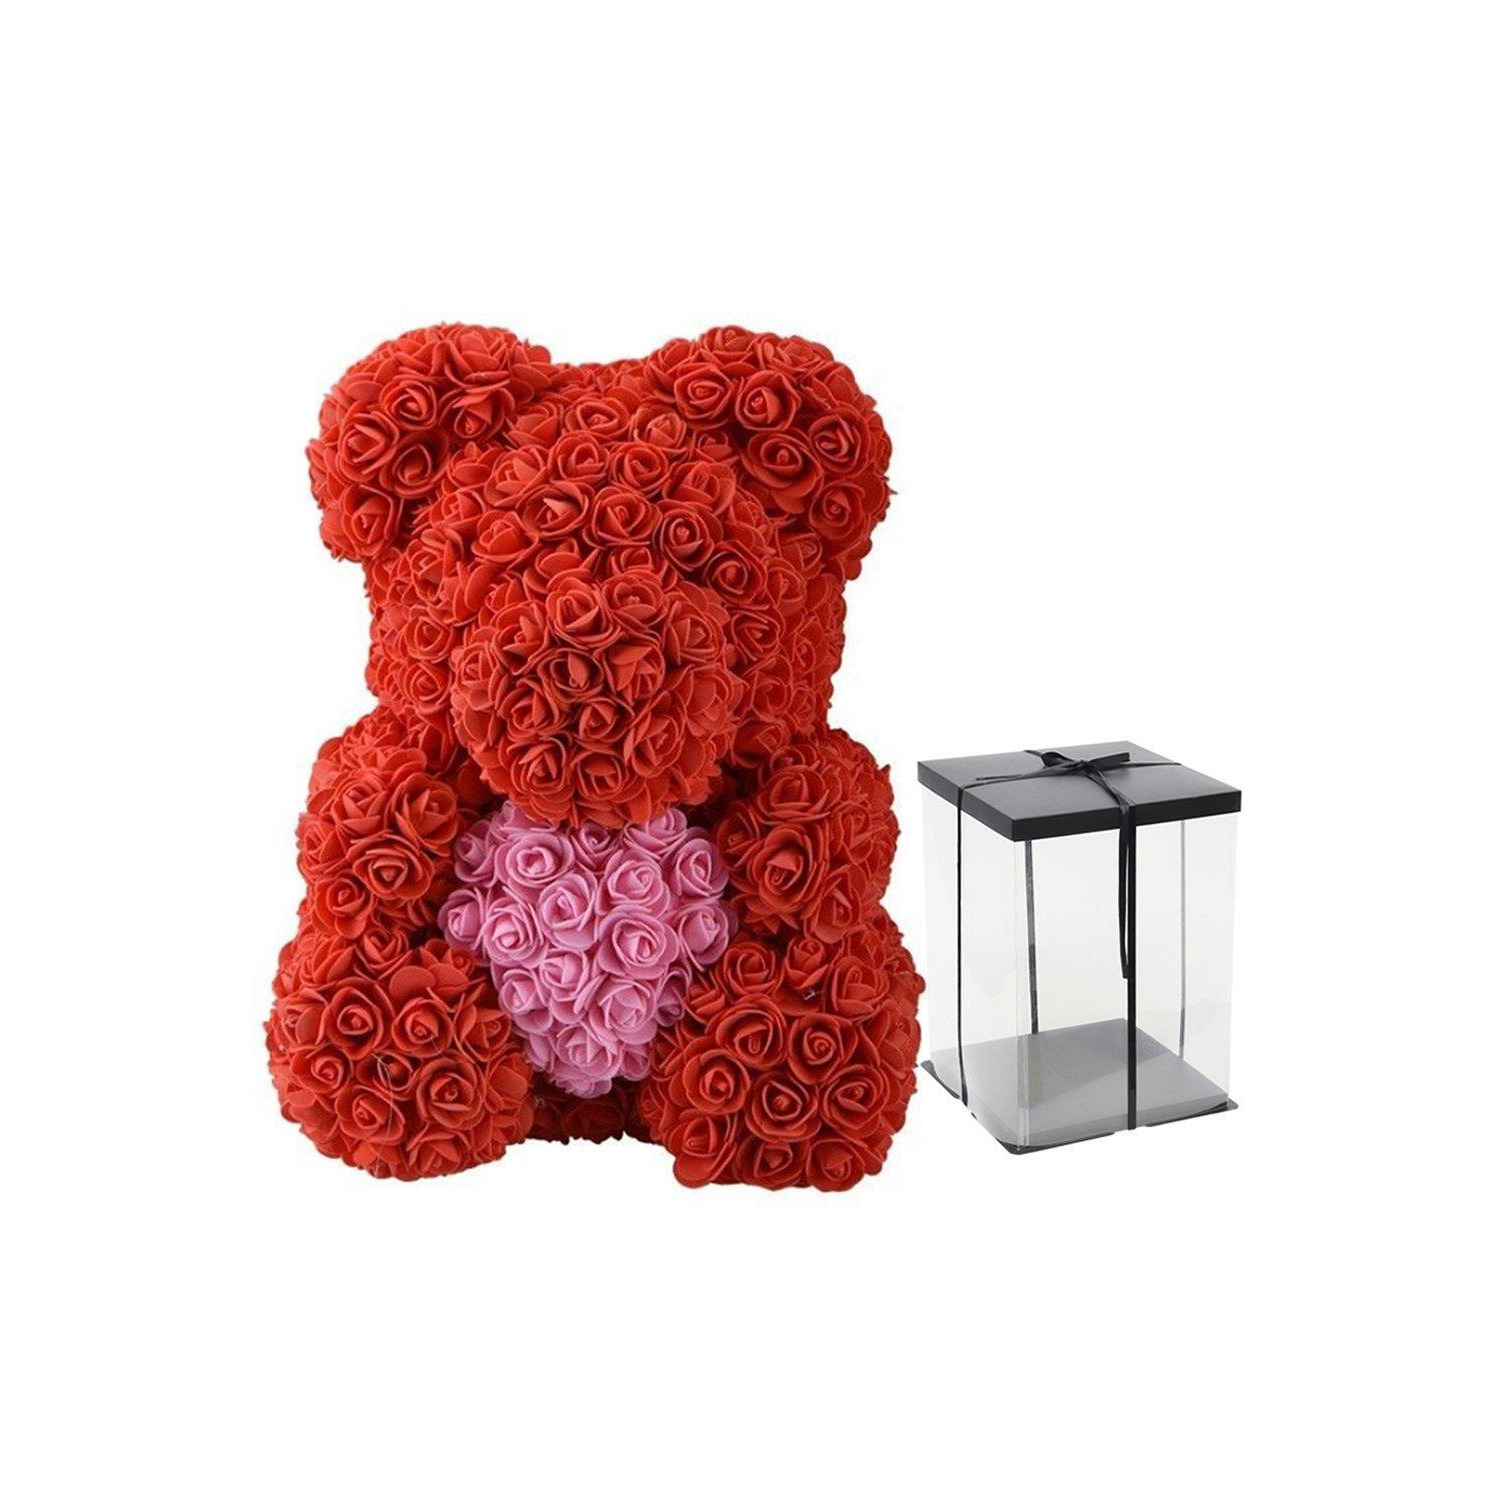 Artificial Rose Heart Teddy Bear with Gift Box - image 1